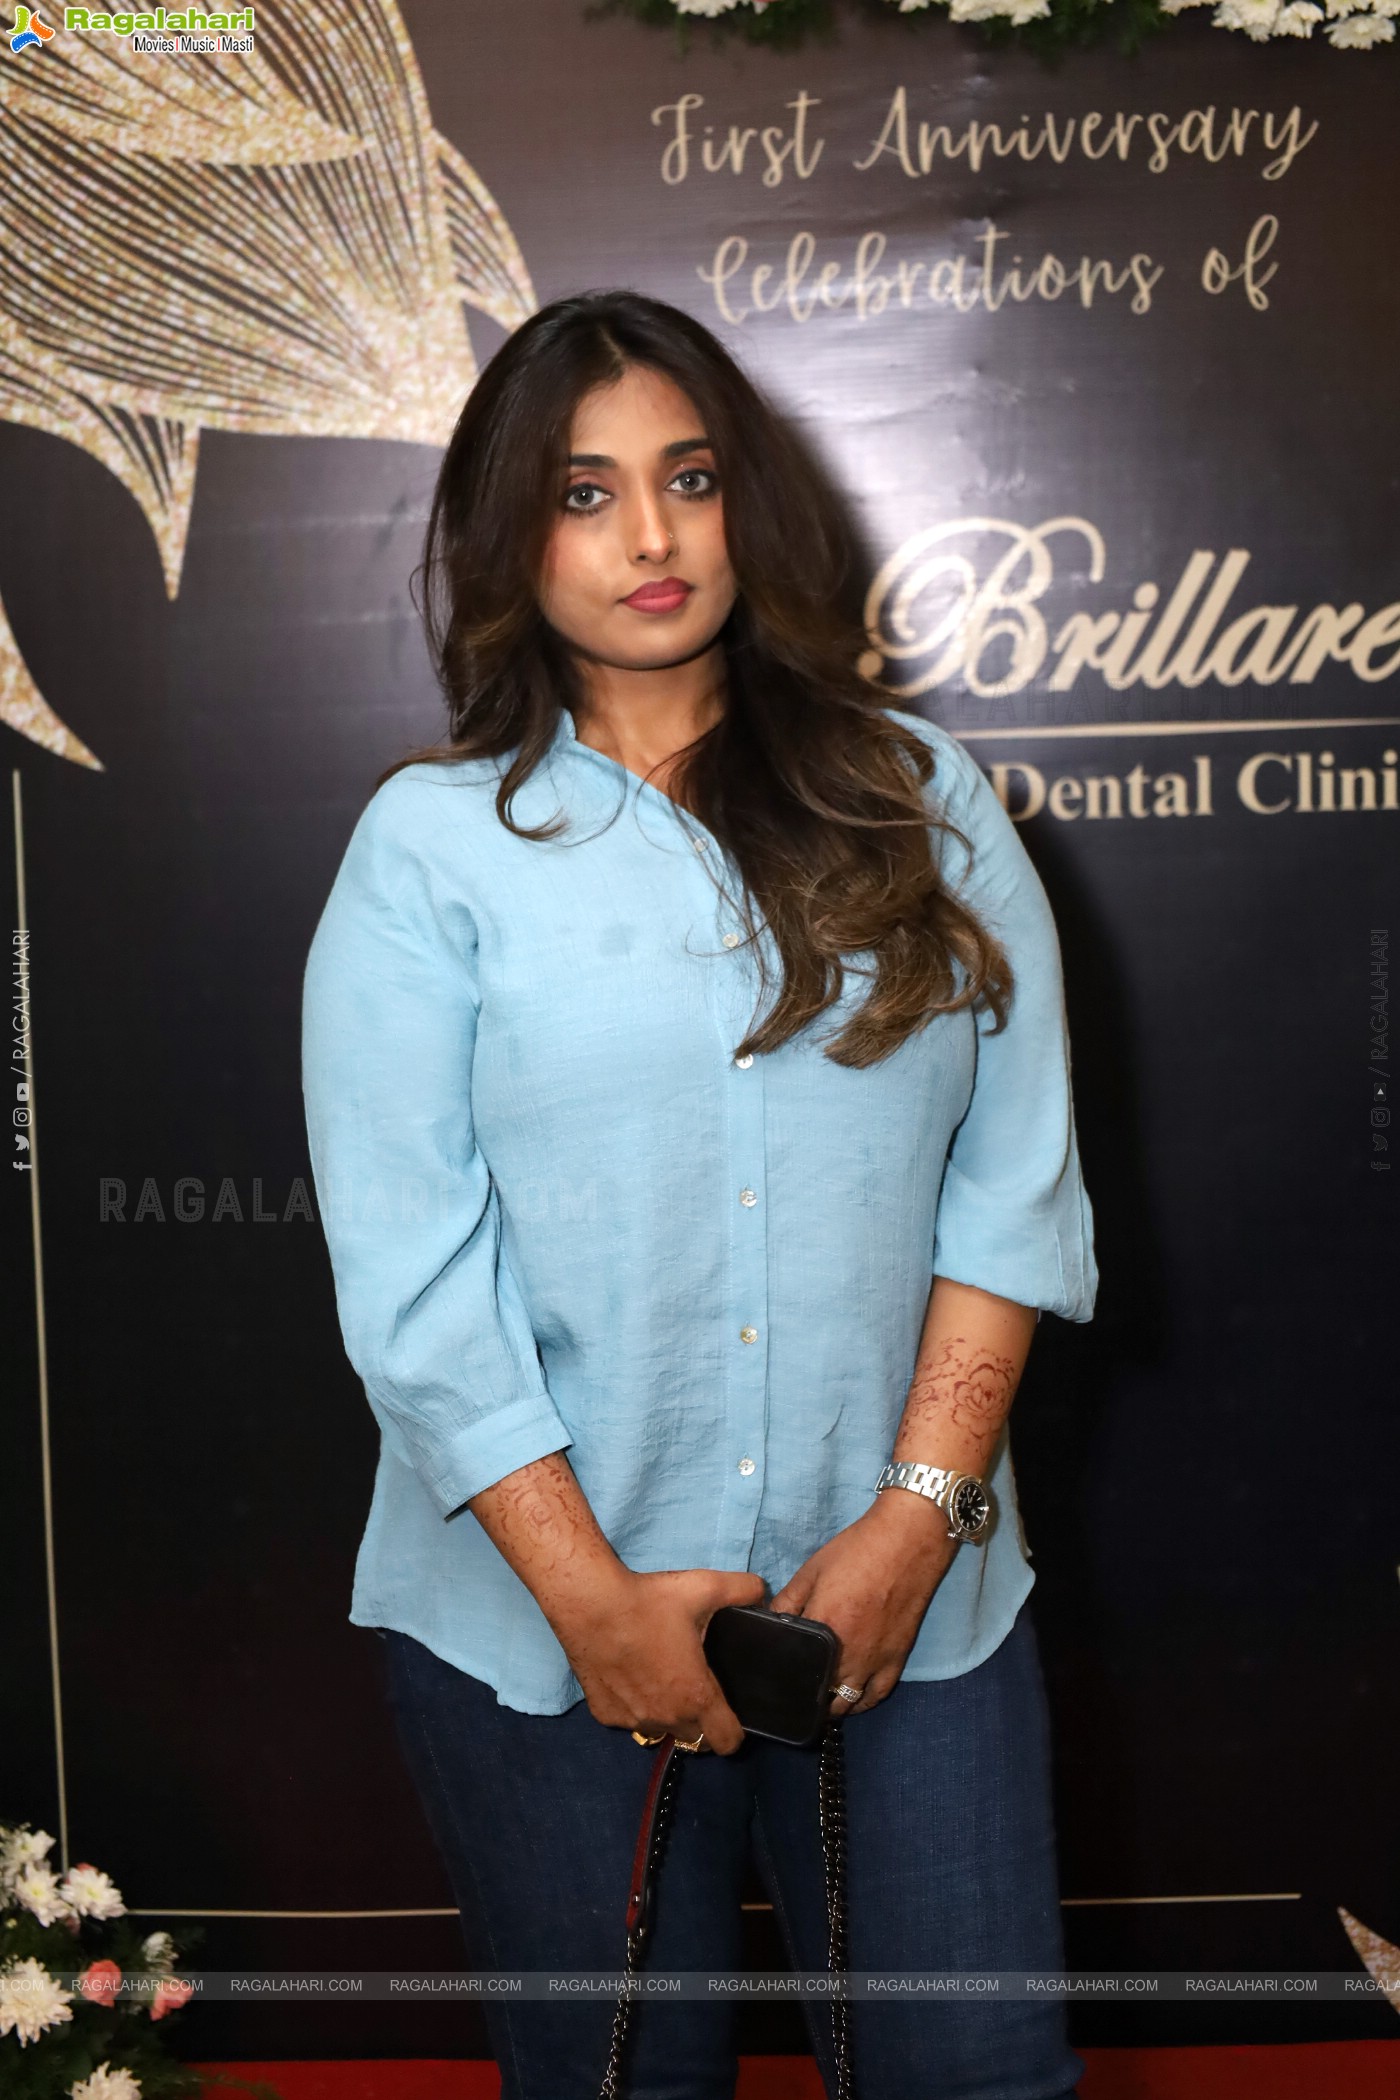 Brillare Clinic Celebrates First Anniversary with Gratitude and Glamour